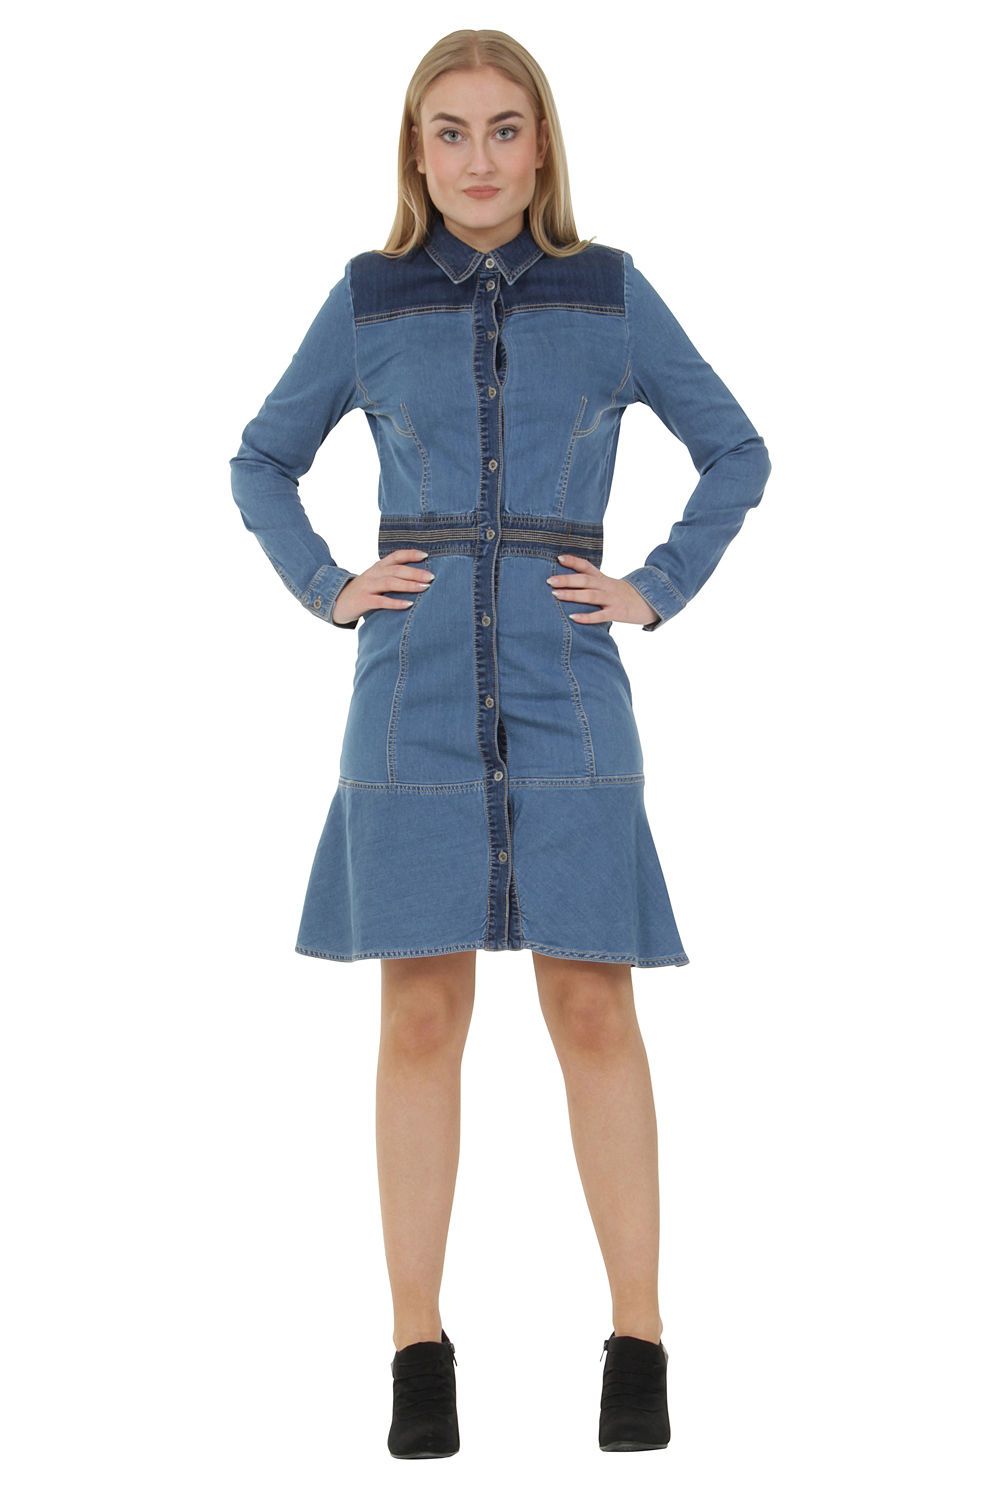 Full frontal view with hands on hips of slightly stretchy, button down denim dress with dark wash denim detailing.